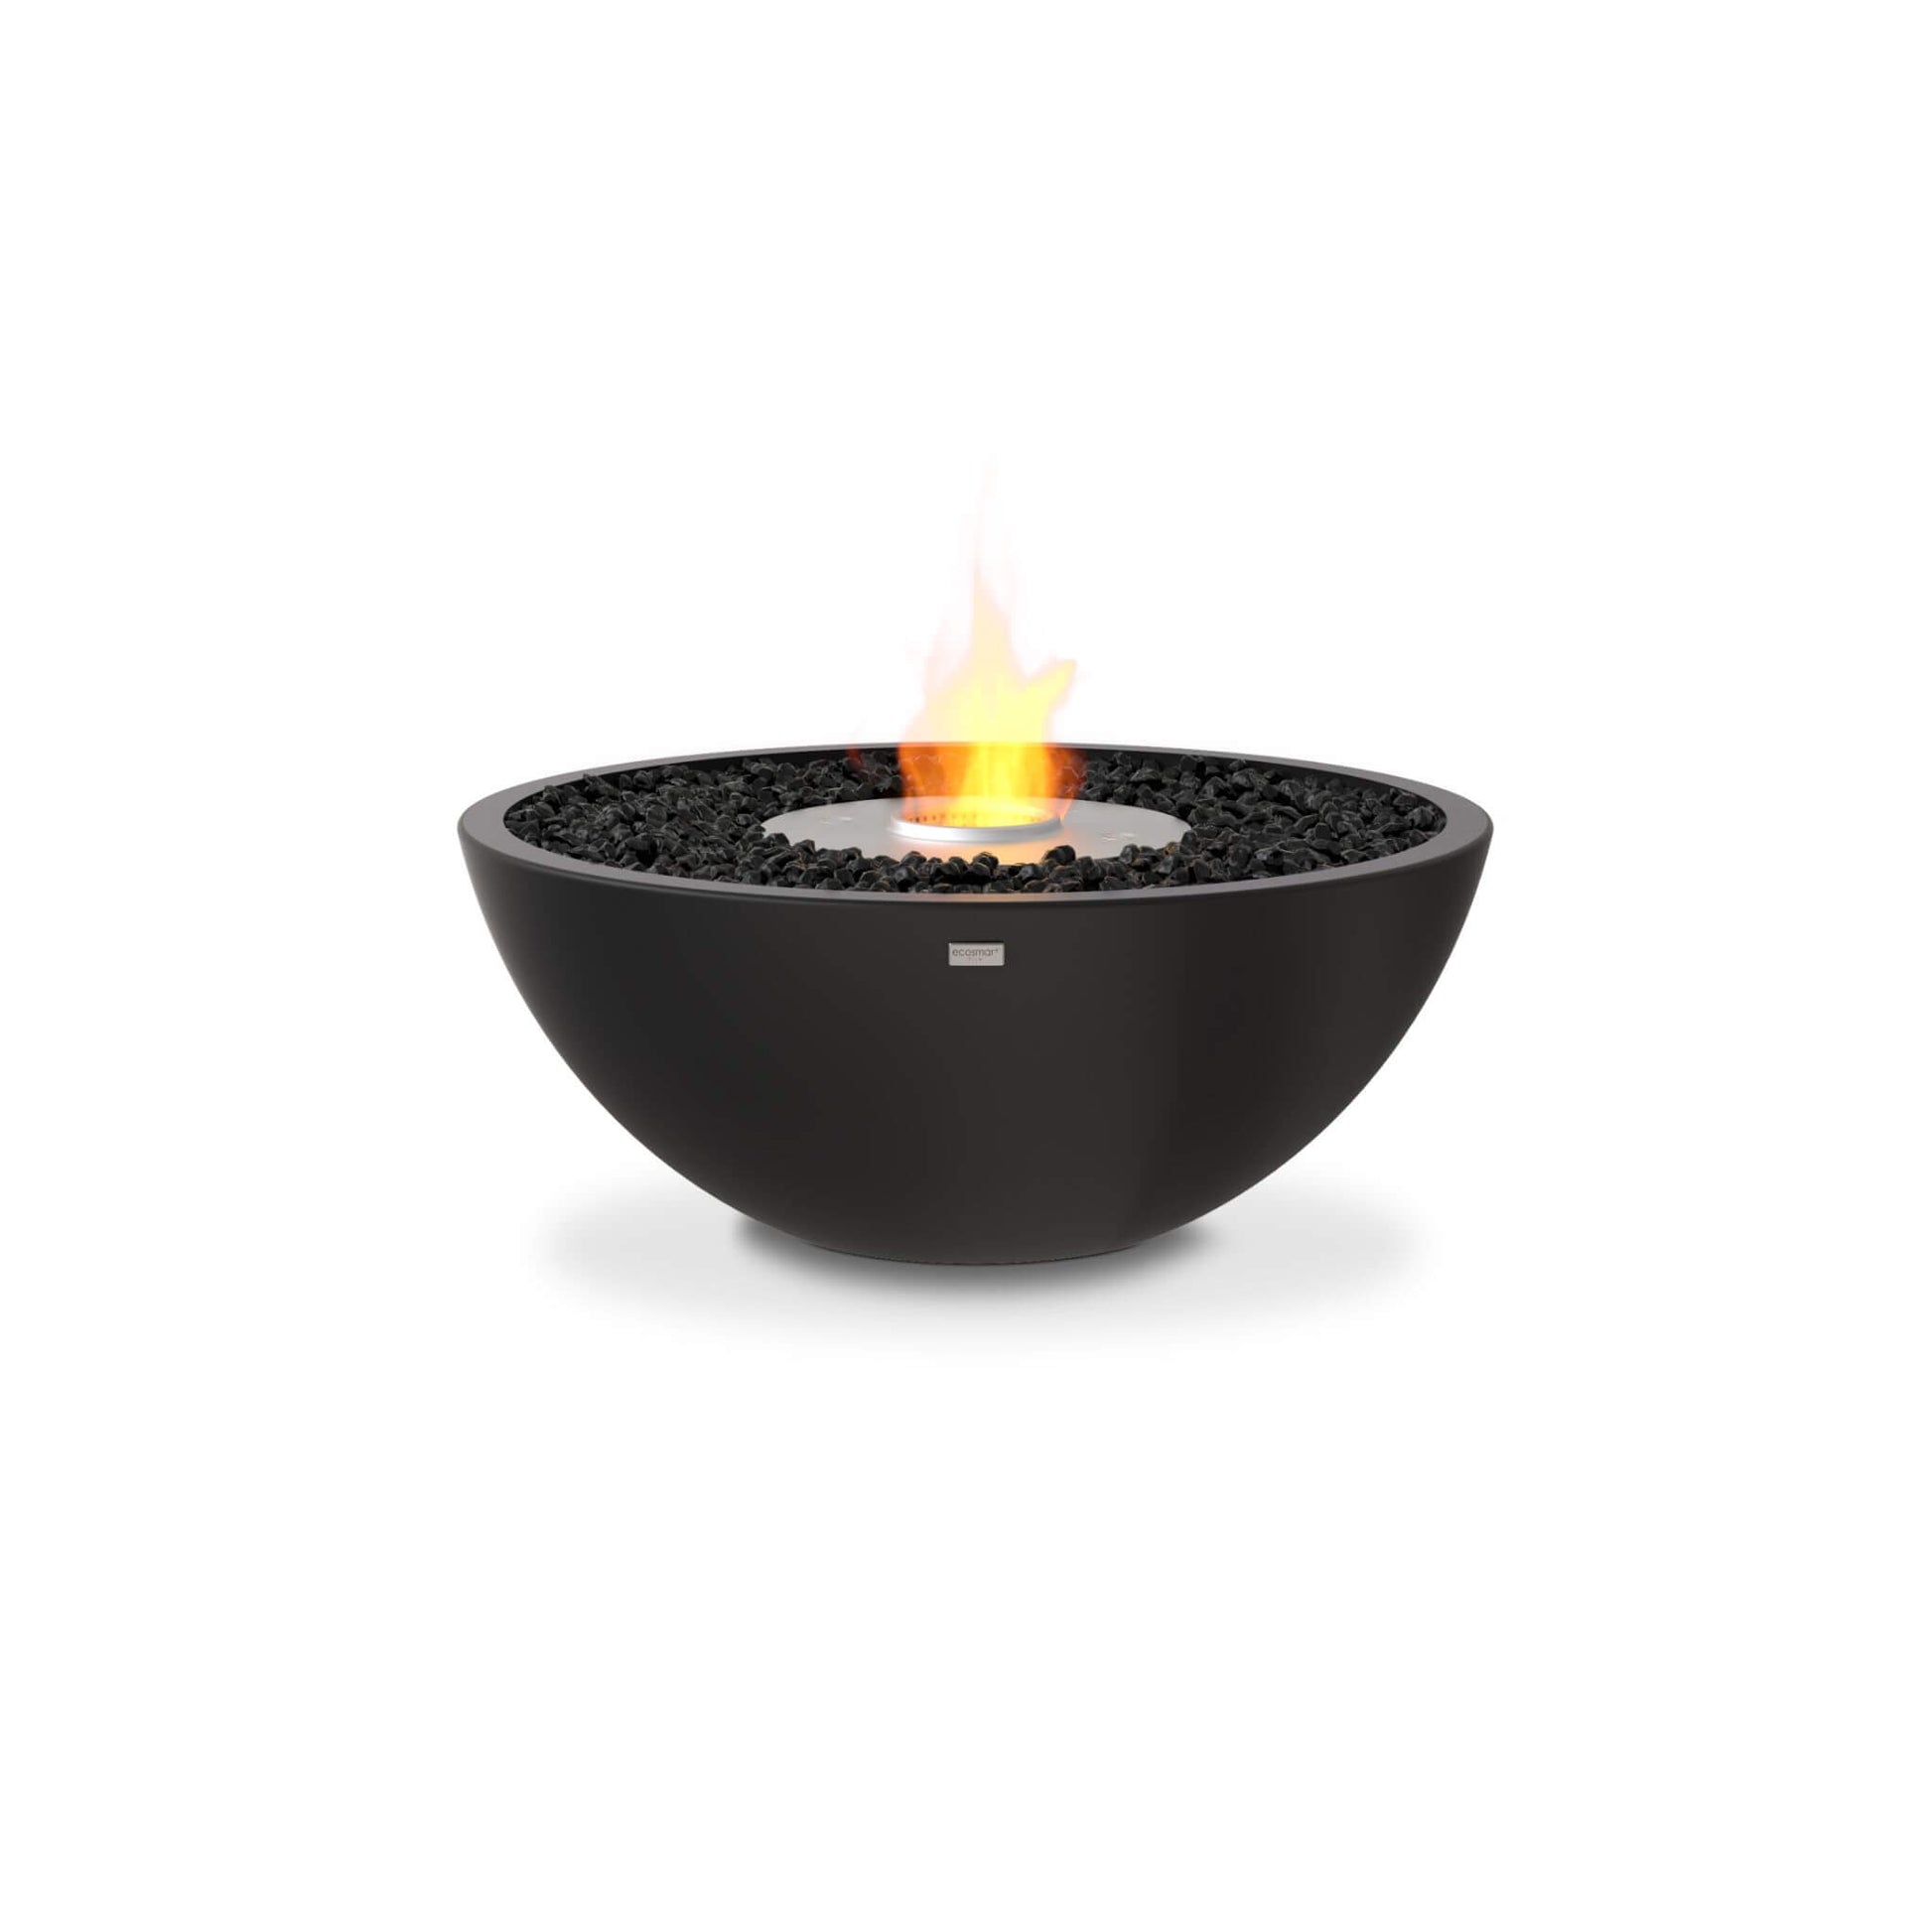 Ecosmart Fire Mix 850 bioethanol fire pit bowl in black concrete with a stainless steel burner and decorative black charcoal